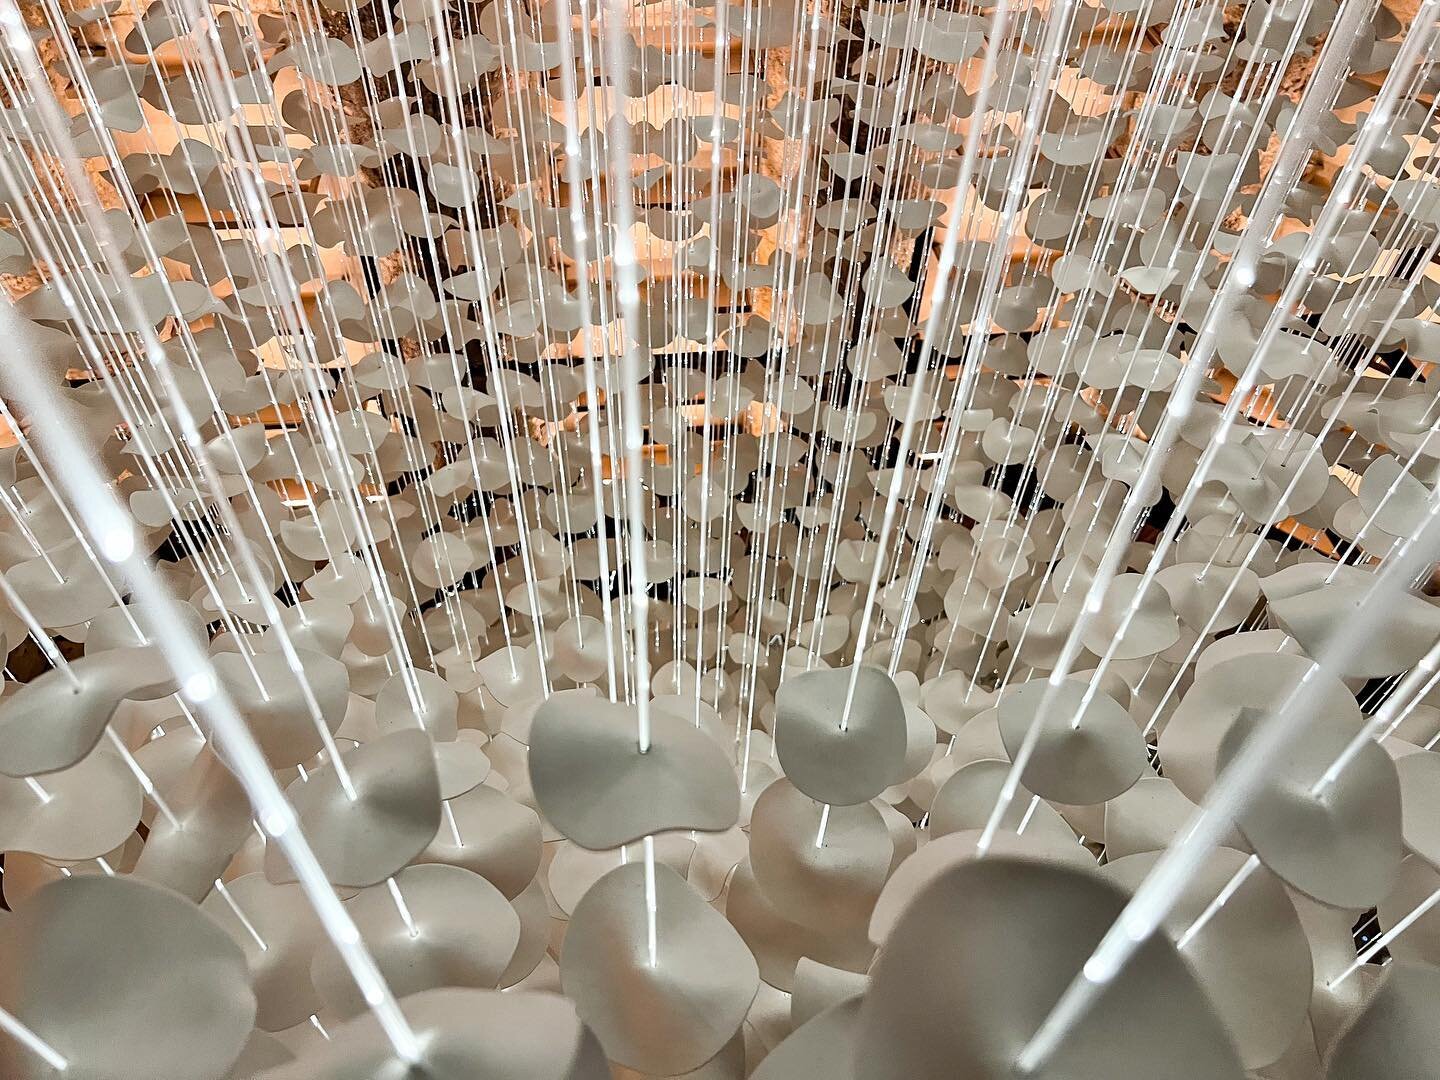 ⁣
Incorporating light into my suspended installations can be achieved in a multitude of ways to create an aesthetic which is striking yet still gentle, creating an ethereal sense within the porcelain. ⁣
⁣
#artcommission #fineart #suspendedinstallatio